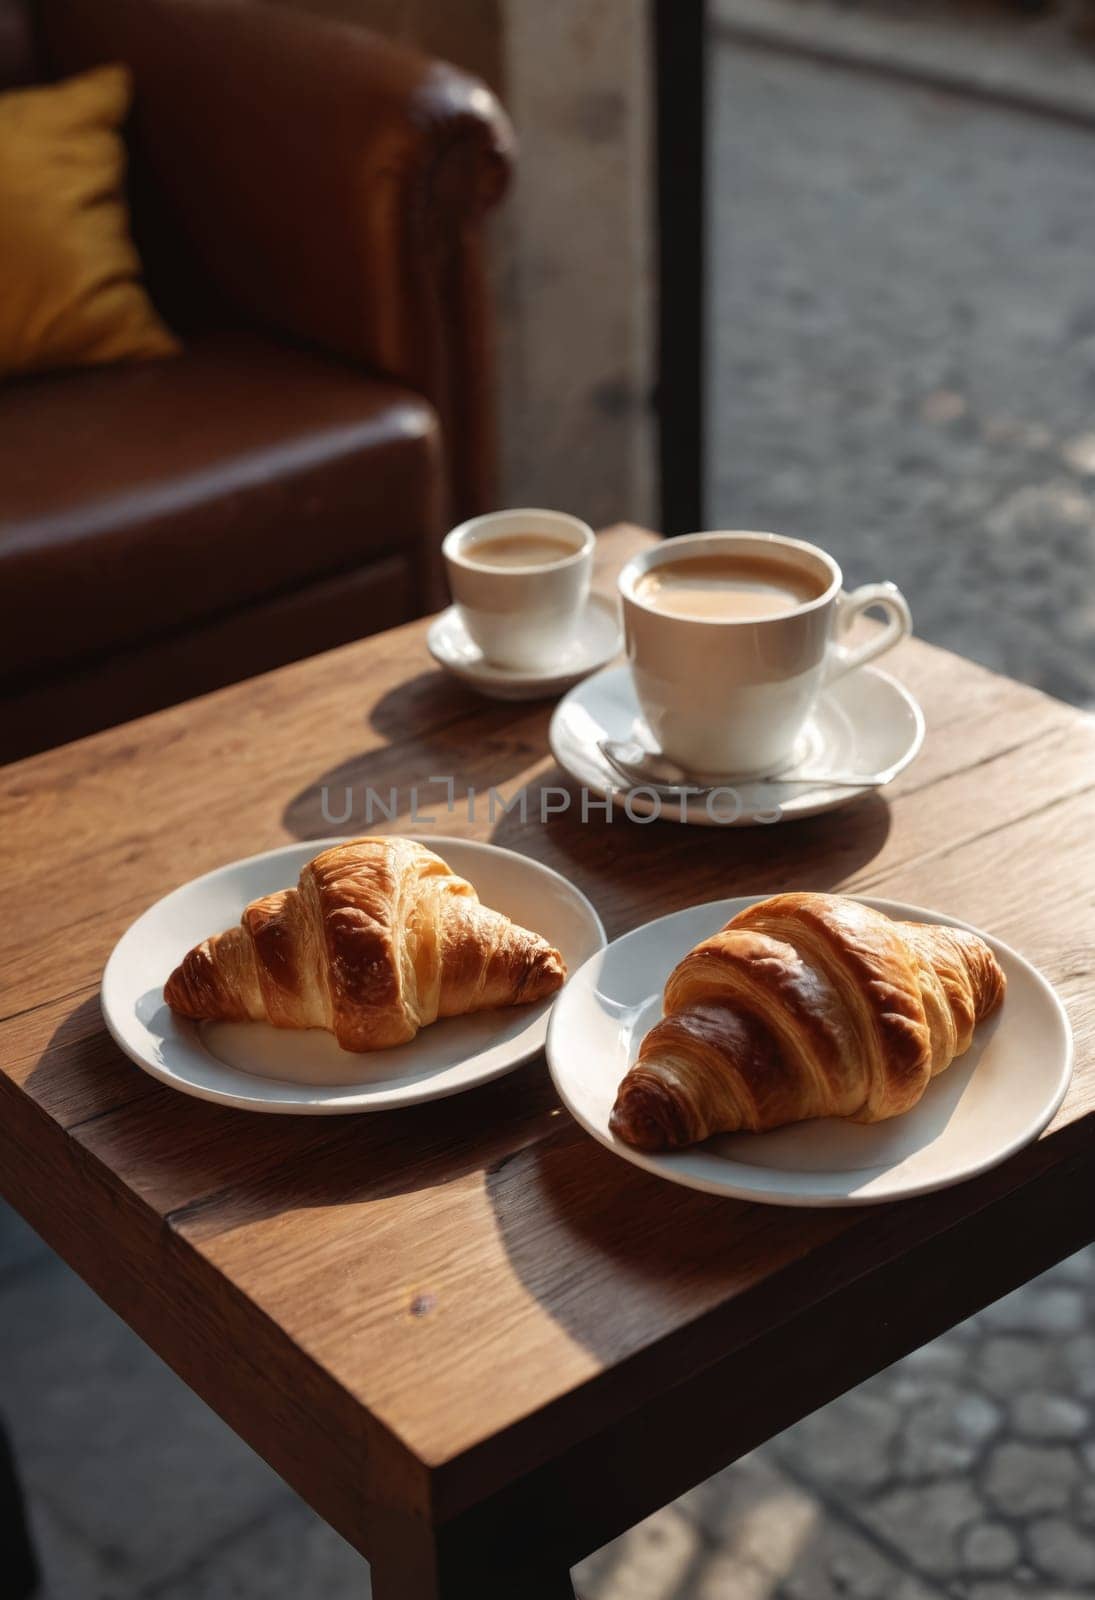 Morning Delight: Croissants and Coffee for Breakfast by Andre1ns